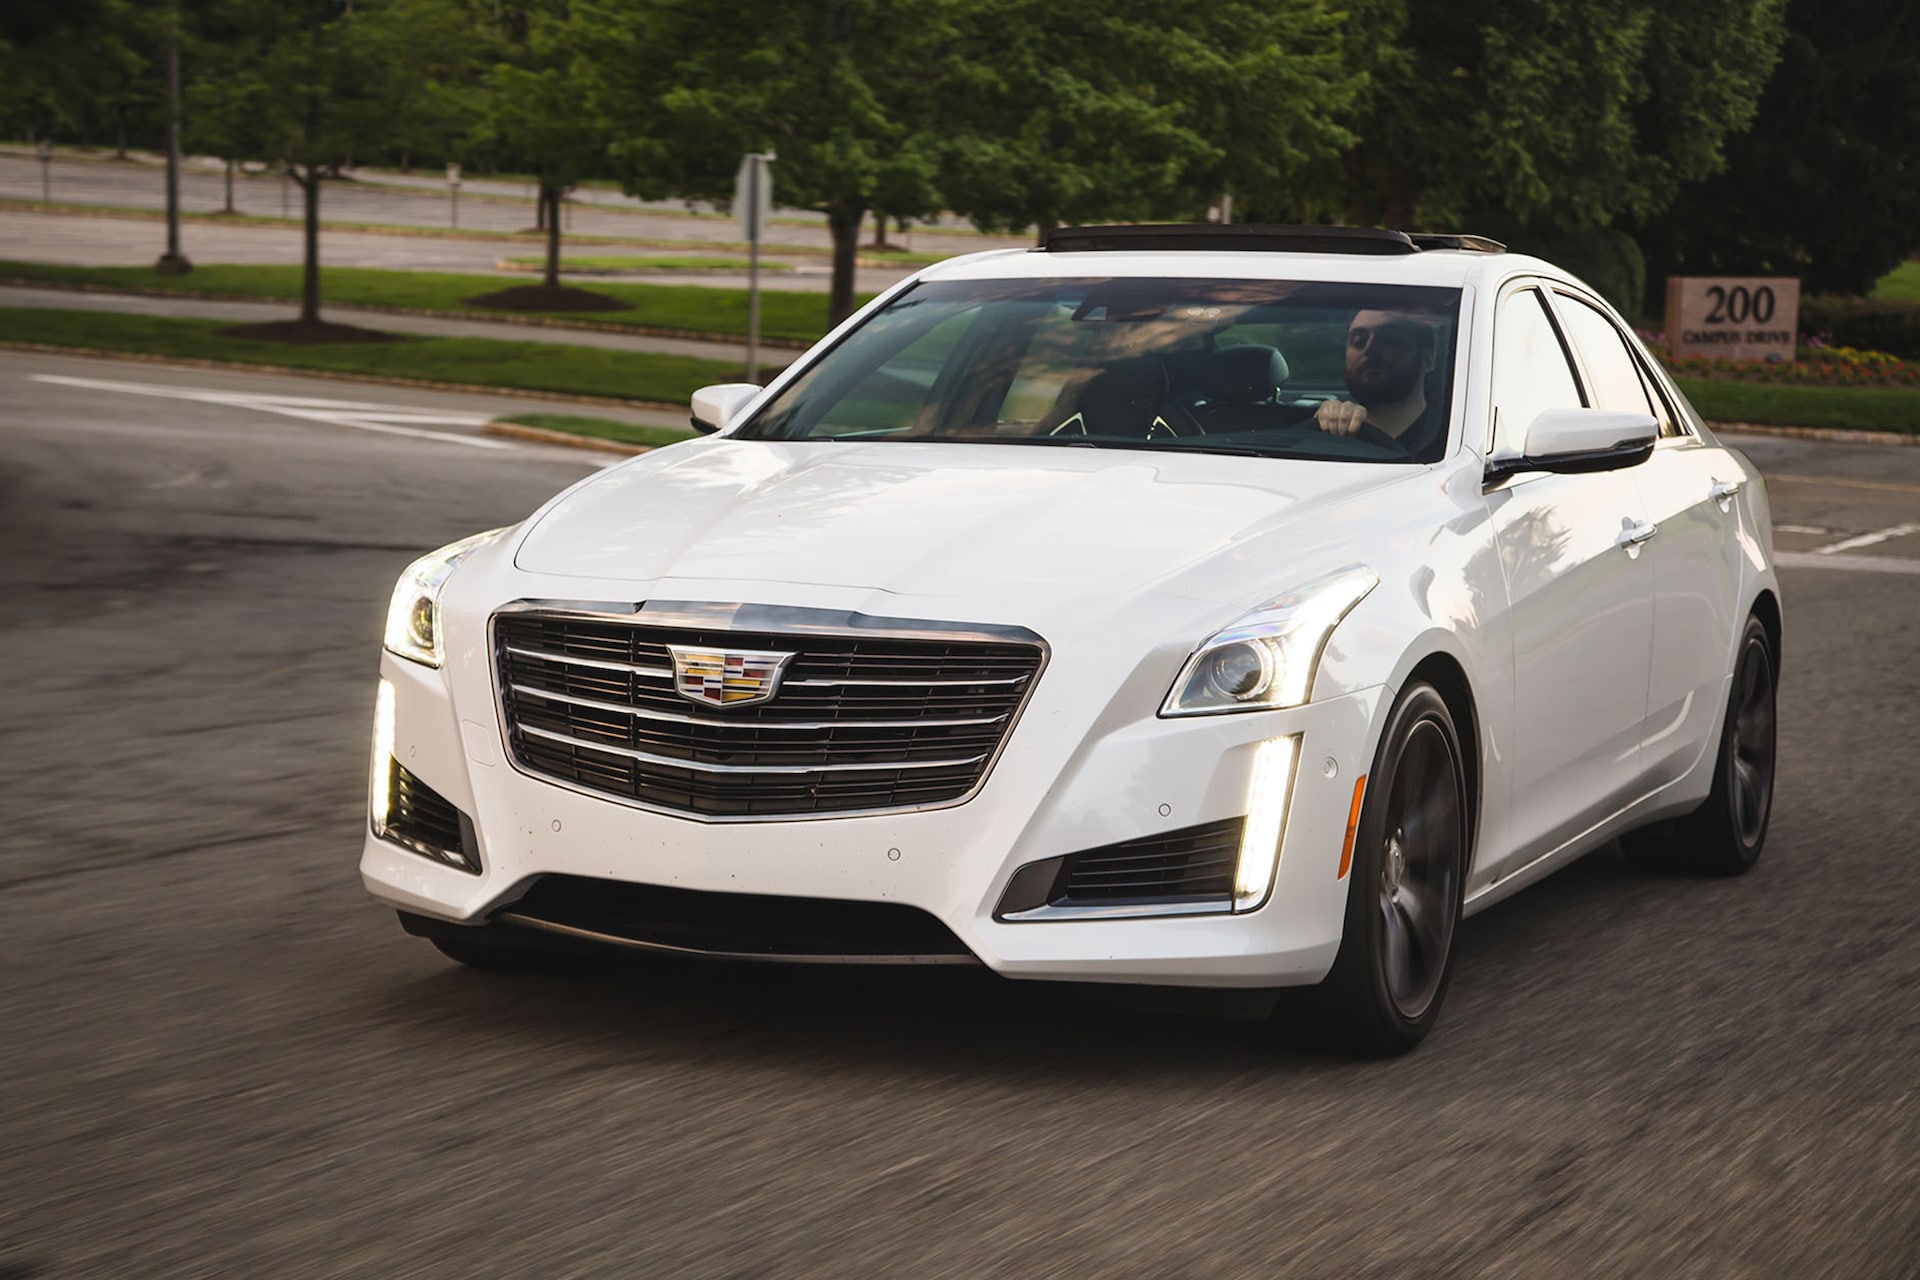 One Week With: 2017 Cadillac CTS Vsport